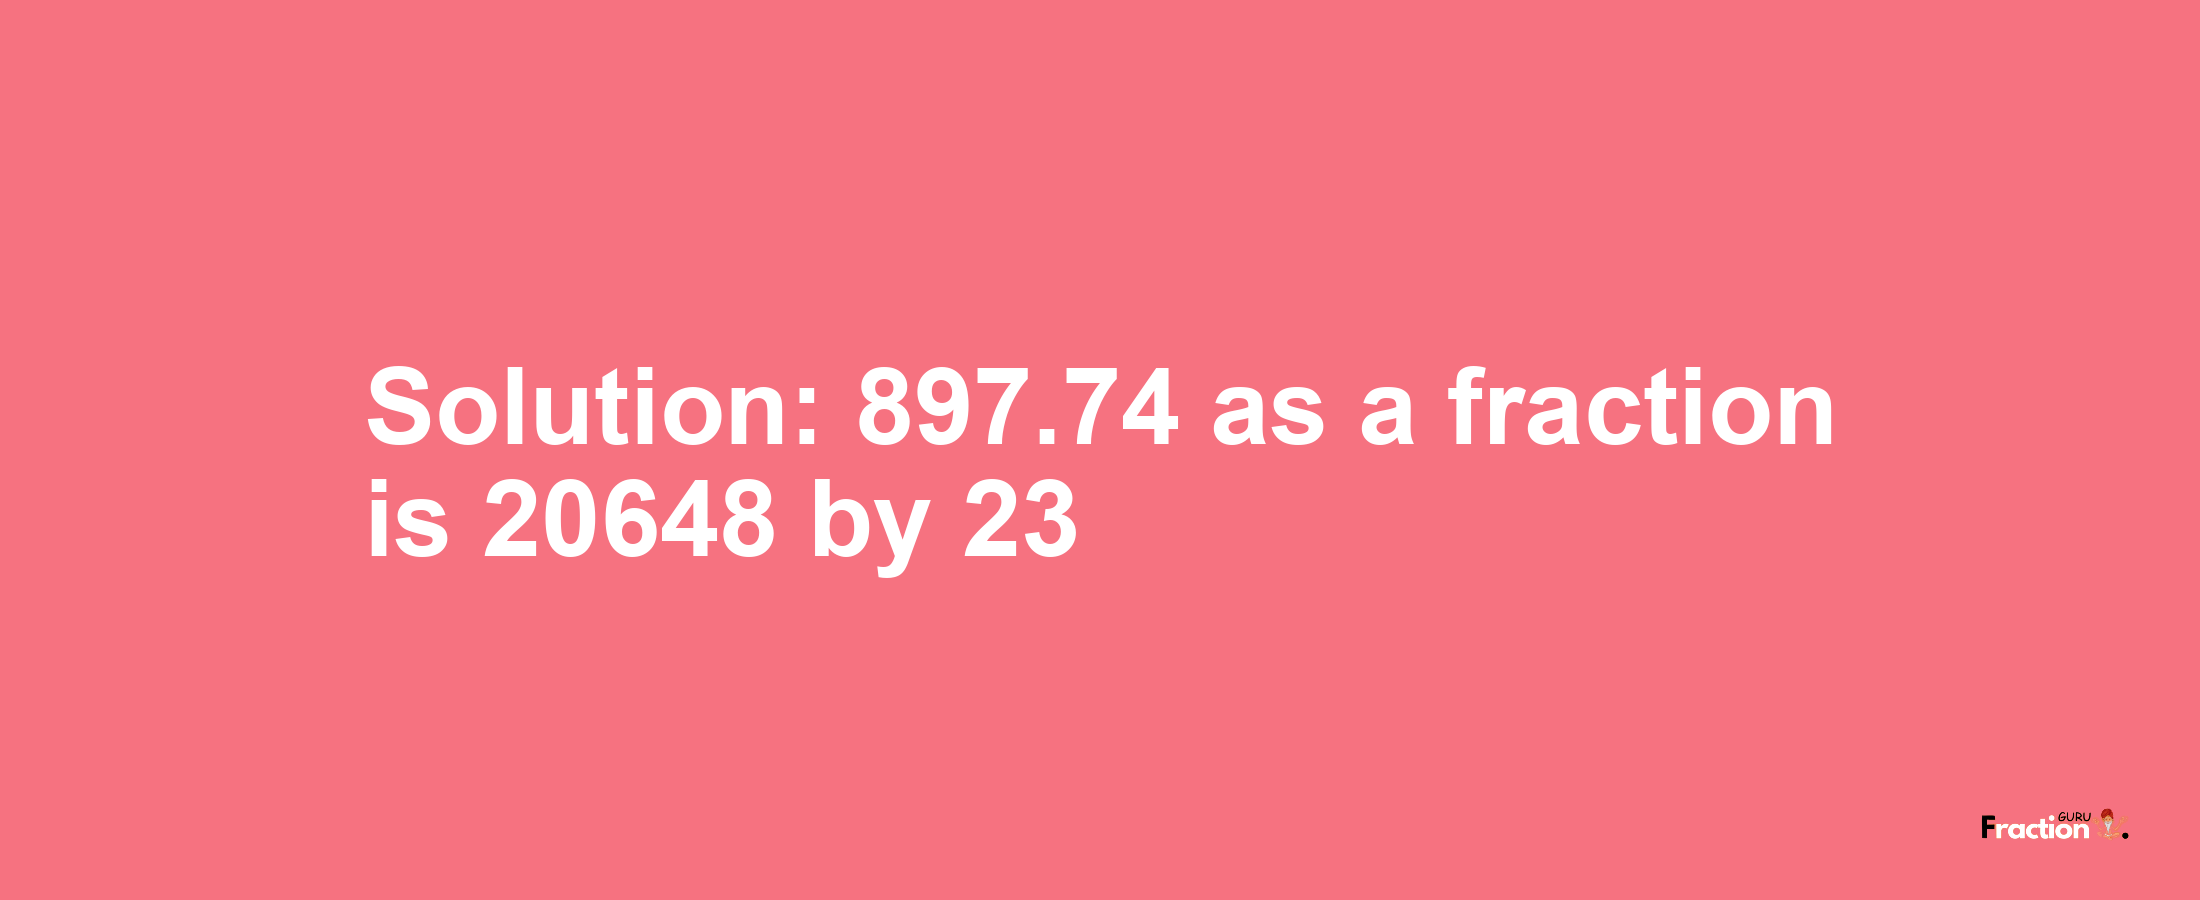 Solution:897.74 as a fraction is 20648/23